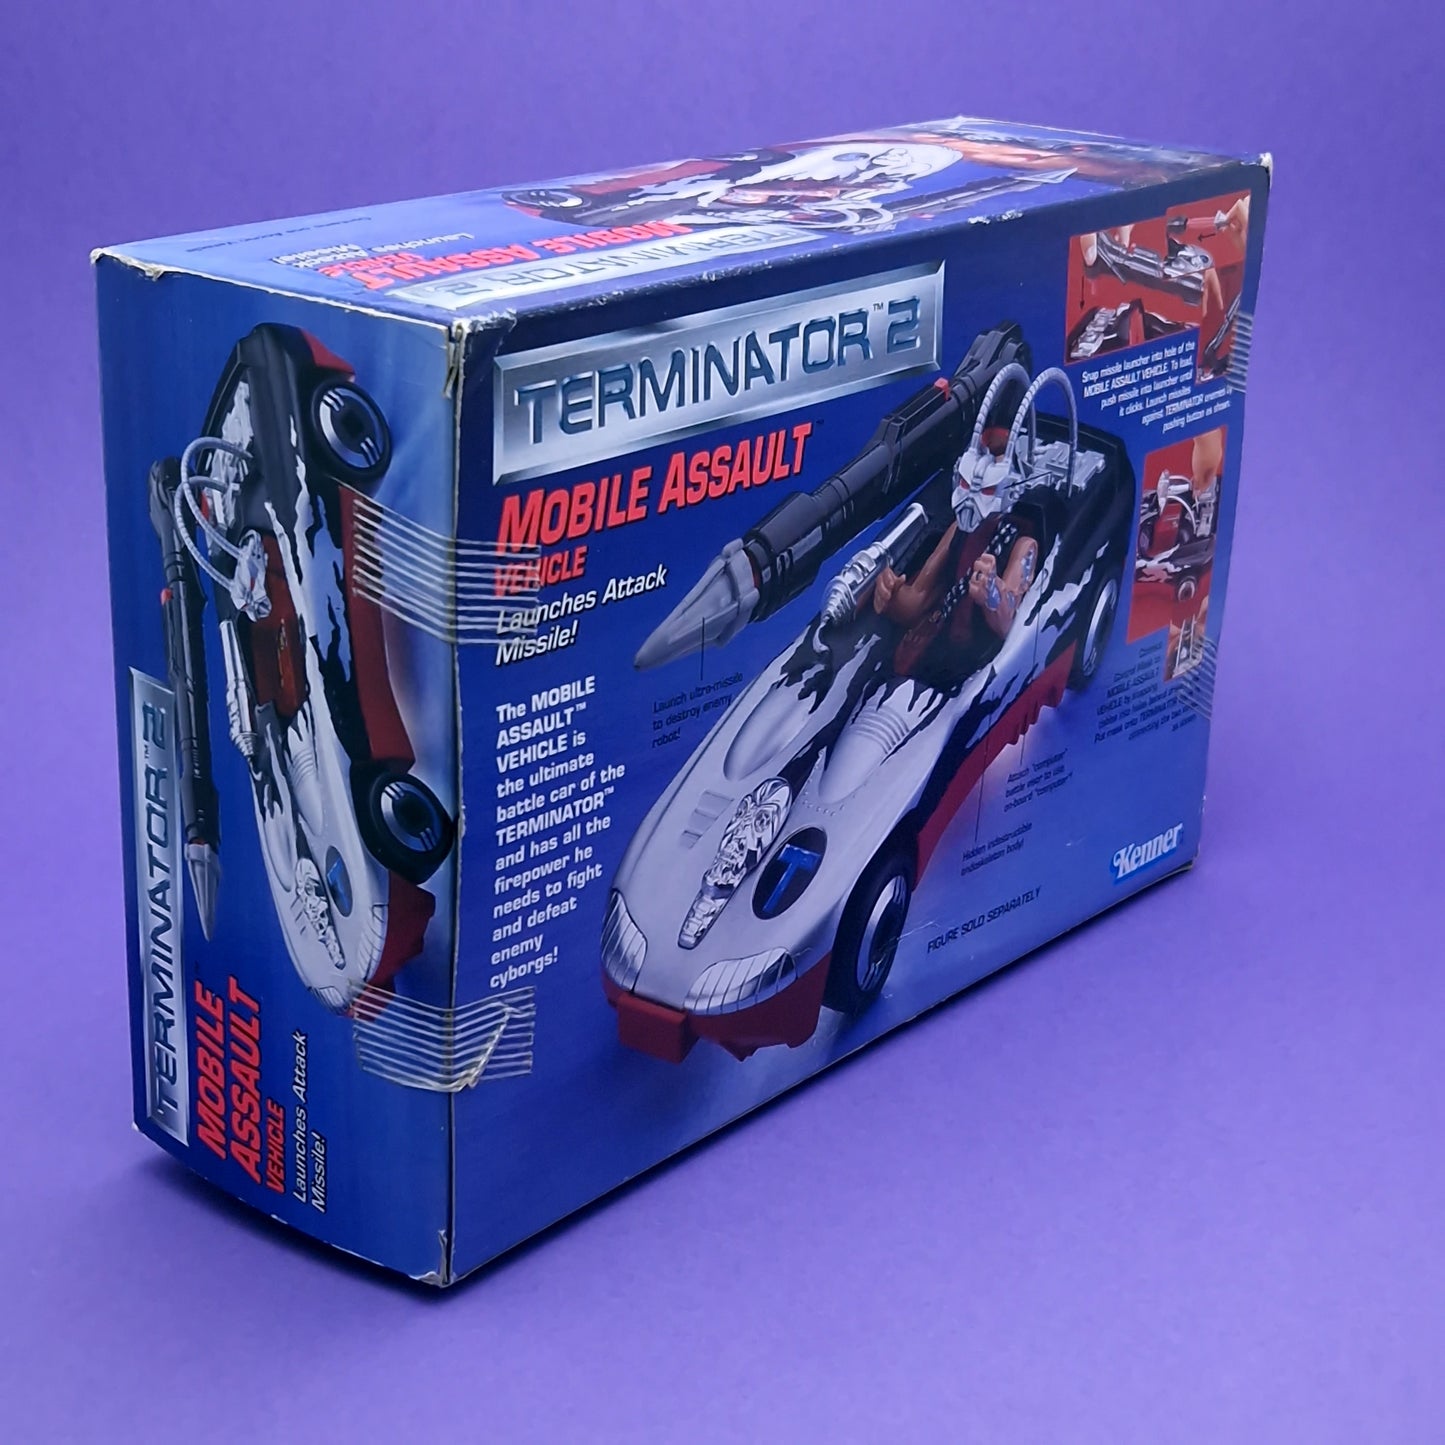 TERMINATOR 2 ☆ MOBILE ASSAULT VEHICLE For Figures ☆ 90's Sealed MISB Boxed Kenner